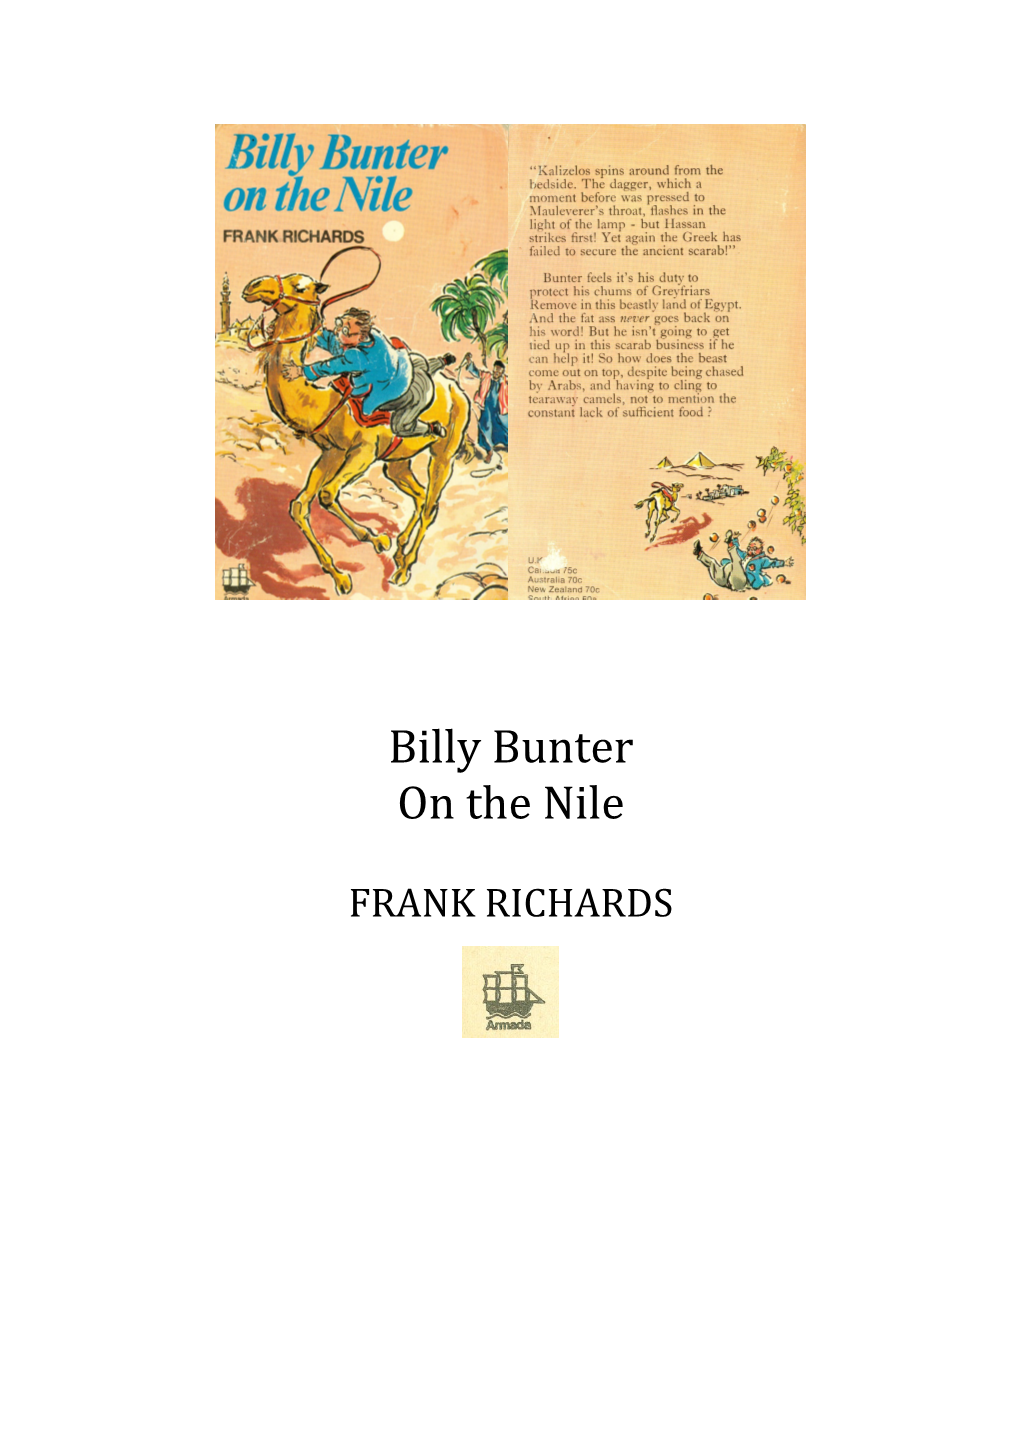 Billy Bunter on the Nile